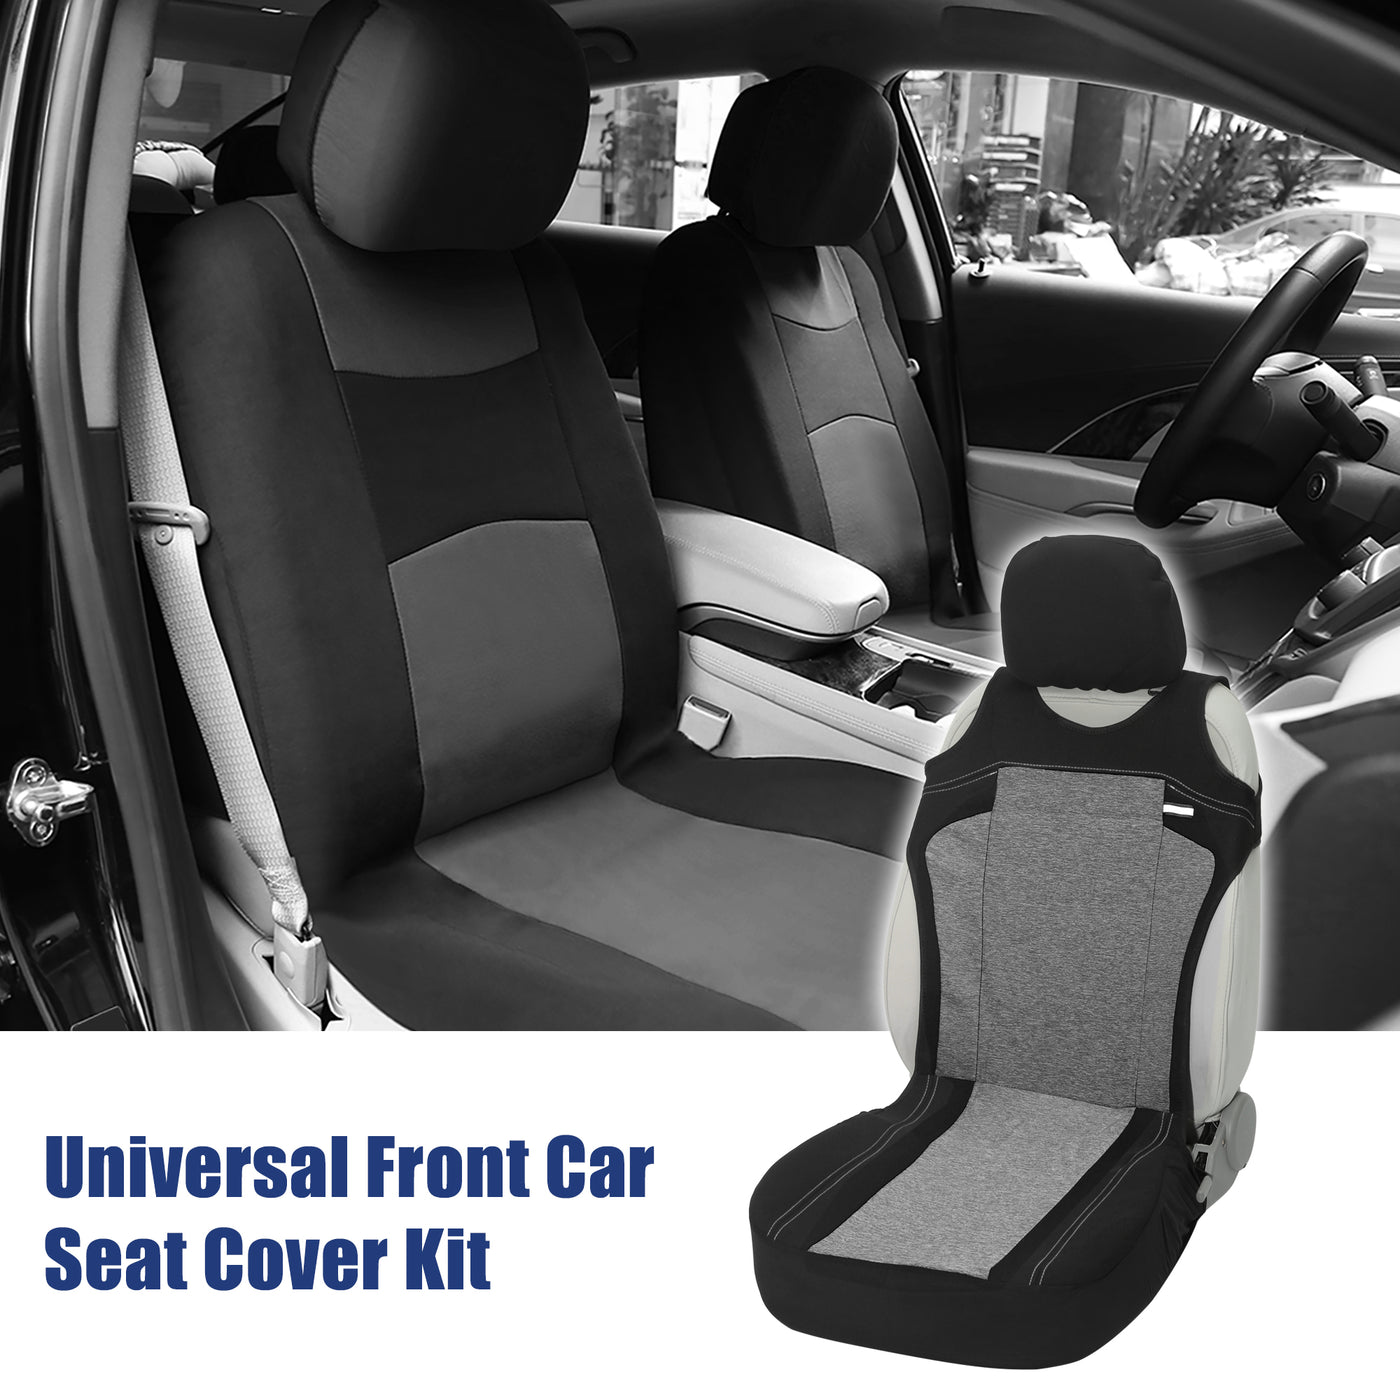 X AUTOHAUX Universal Front Car Seat Cover Kit Cloth Fabric Seat Protector Pad Fit for Car Truck SUV Gray